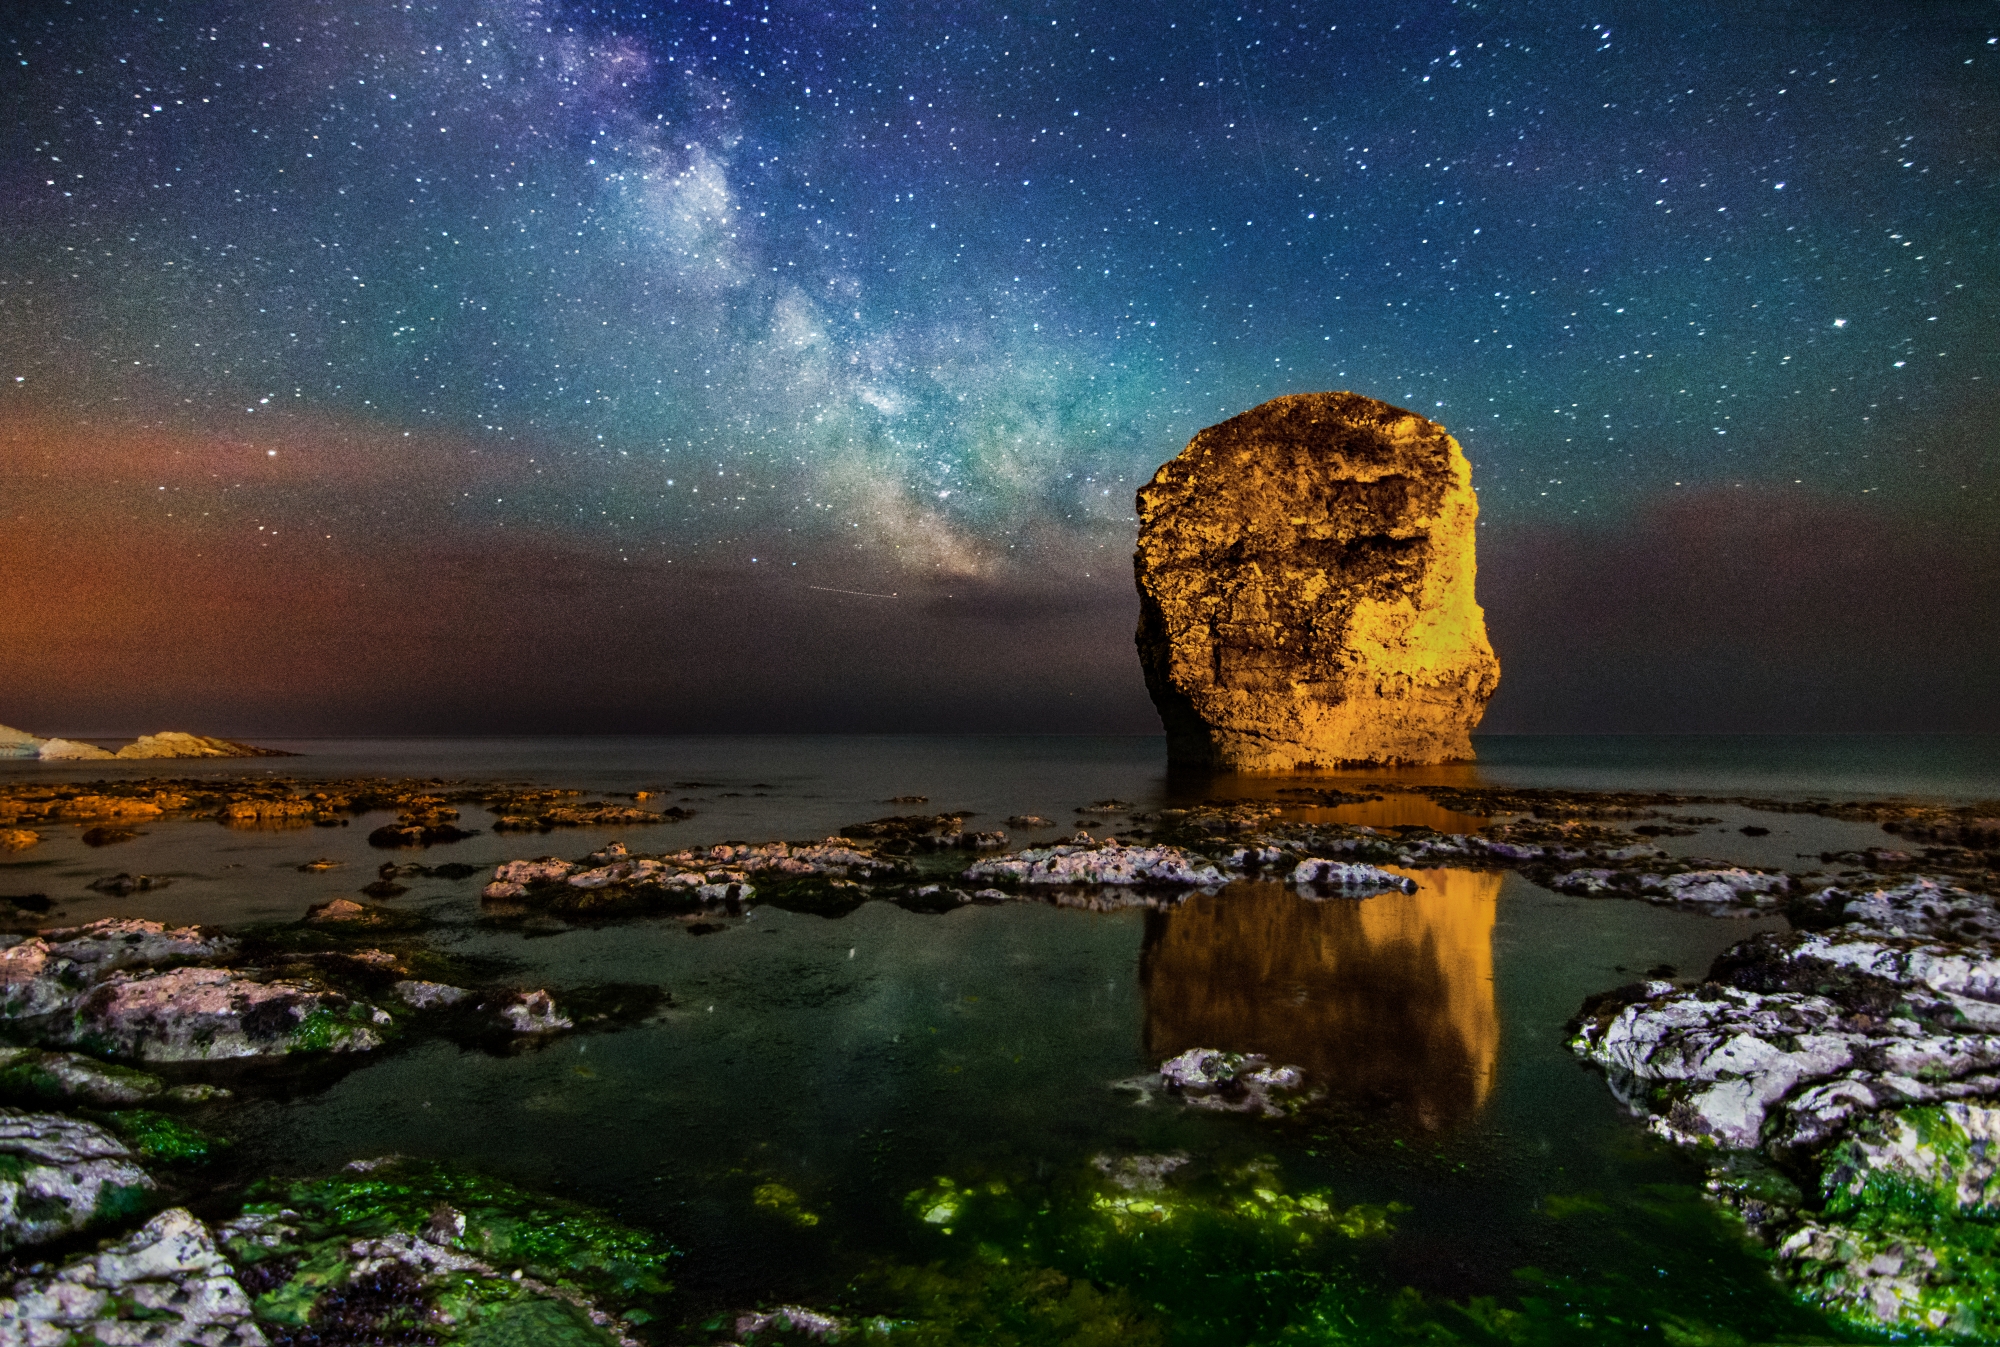 Milky Way over Stag Rock, Freshwater Bay